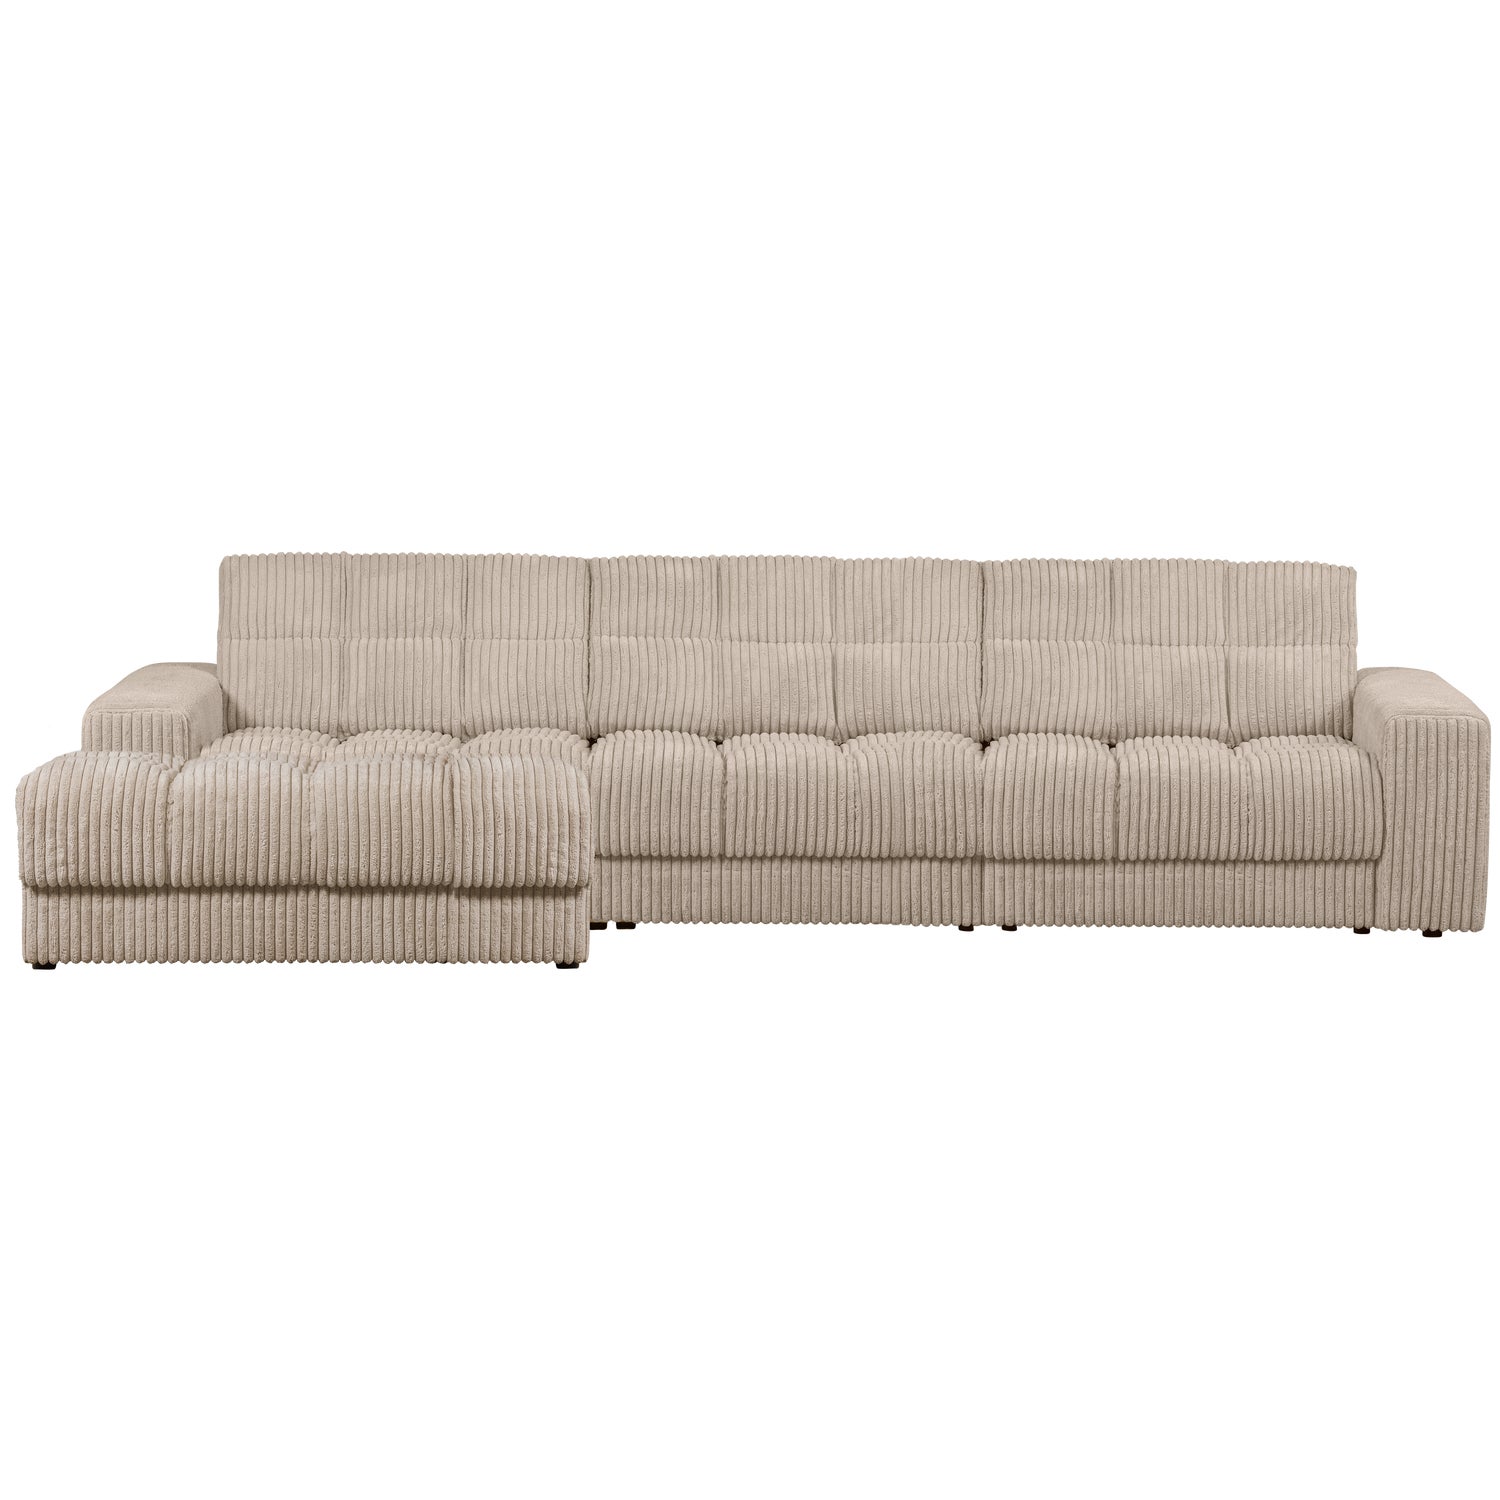 379012-RR-01_VS_WE_Second_date_chaise_longue_links_grove_rinstof_travertin.png?auto=webp&format=png&width=1500&height=1500